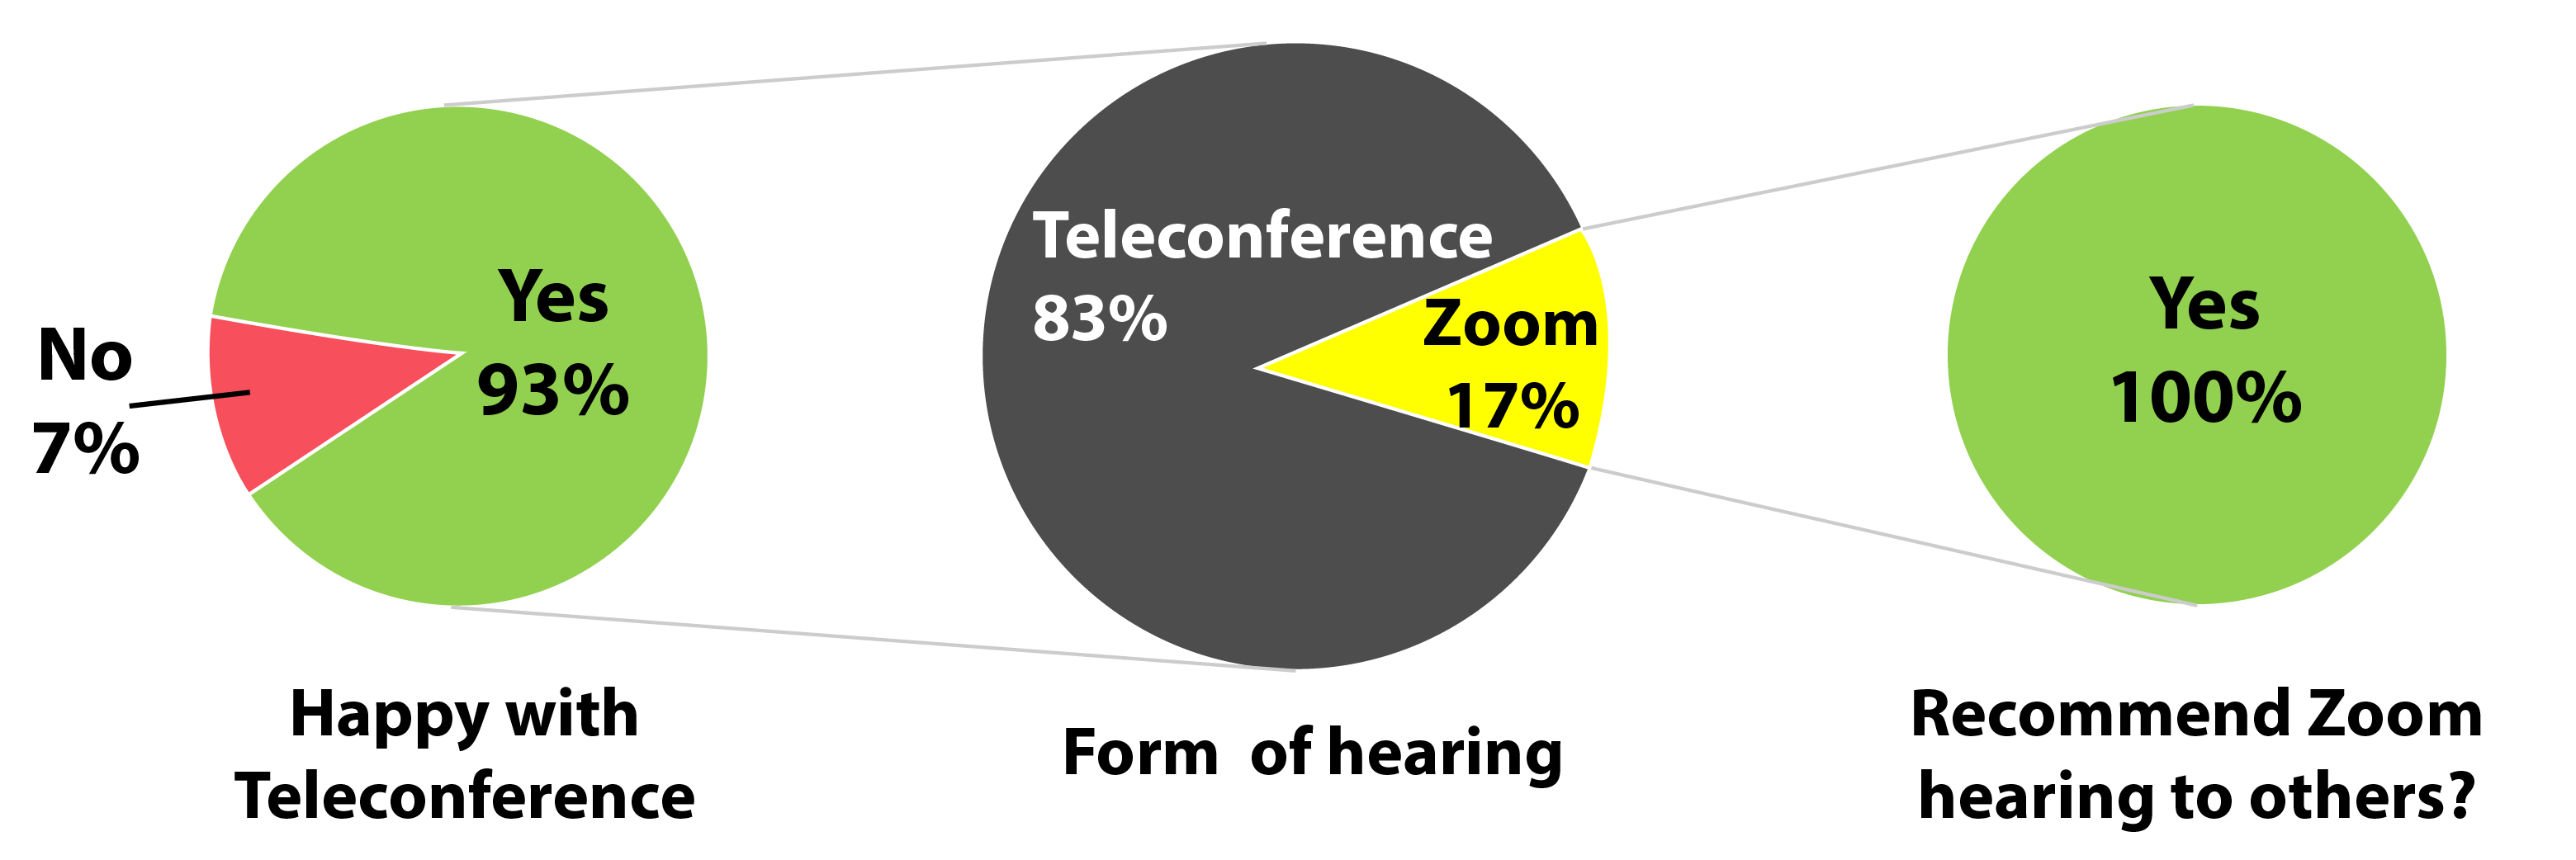 Pie chart of teleconference and zoom percentages